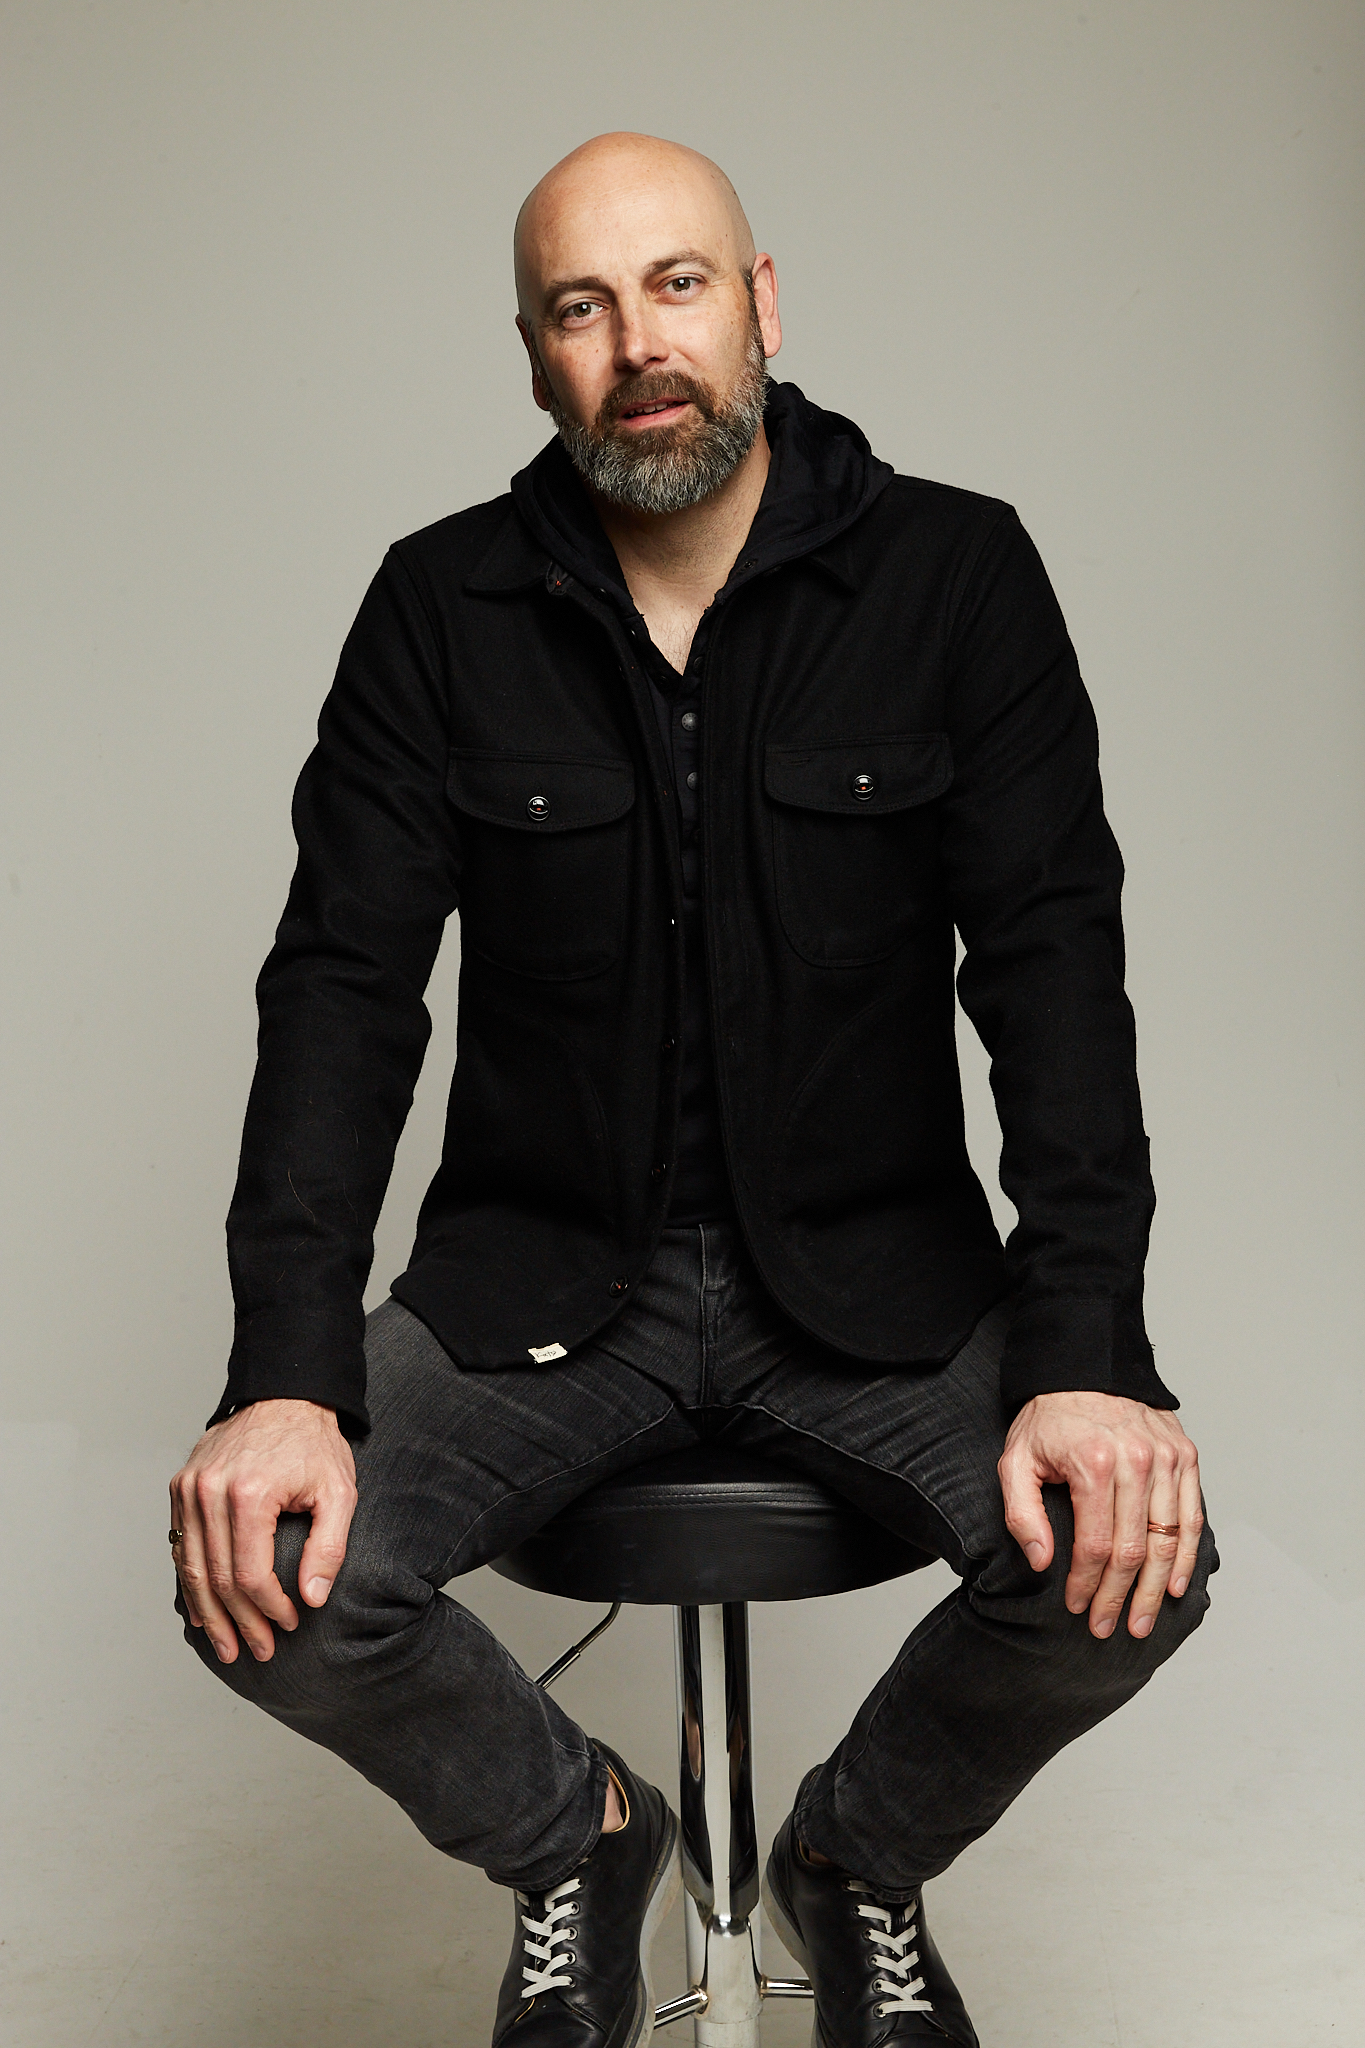 Ben Callahan, seated on a stool, dressed nicely in all black. He has a slightly graying beard and a shaved head, a tall thin build and a curious look in his eyes.